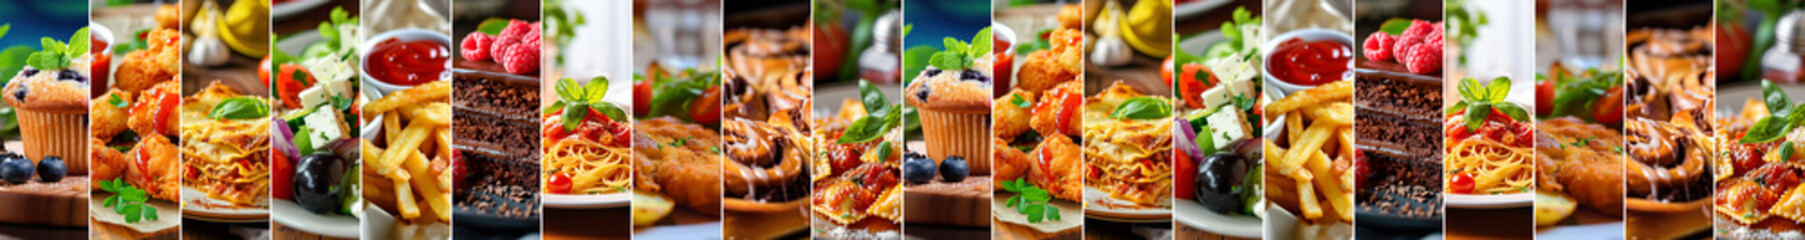 Food background collection meals collage banner with salad lasagne spaghetti french fries muffin and cake